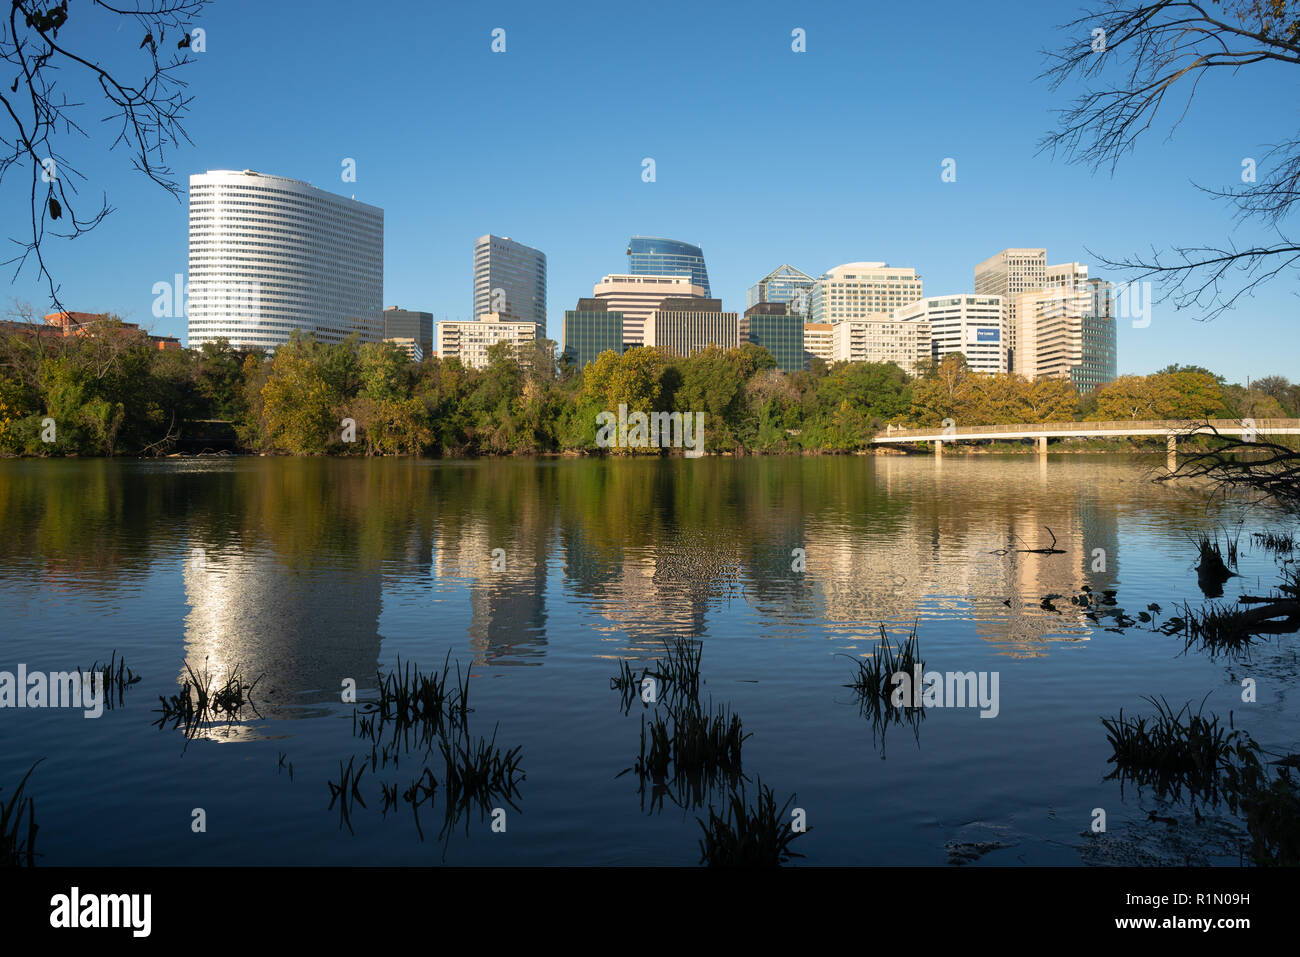 The smooth flowing Potomac River reflects the buildings of Arlington Virginia Stock Photo